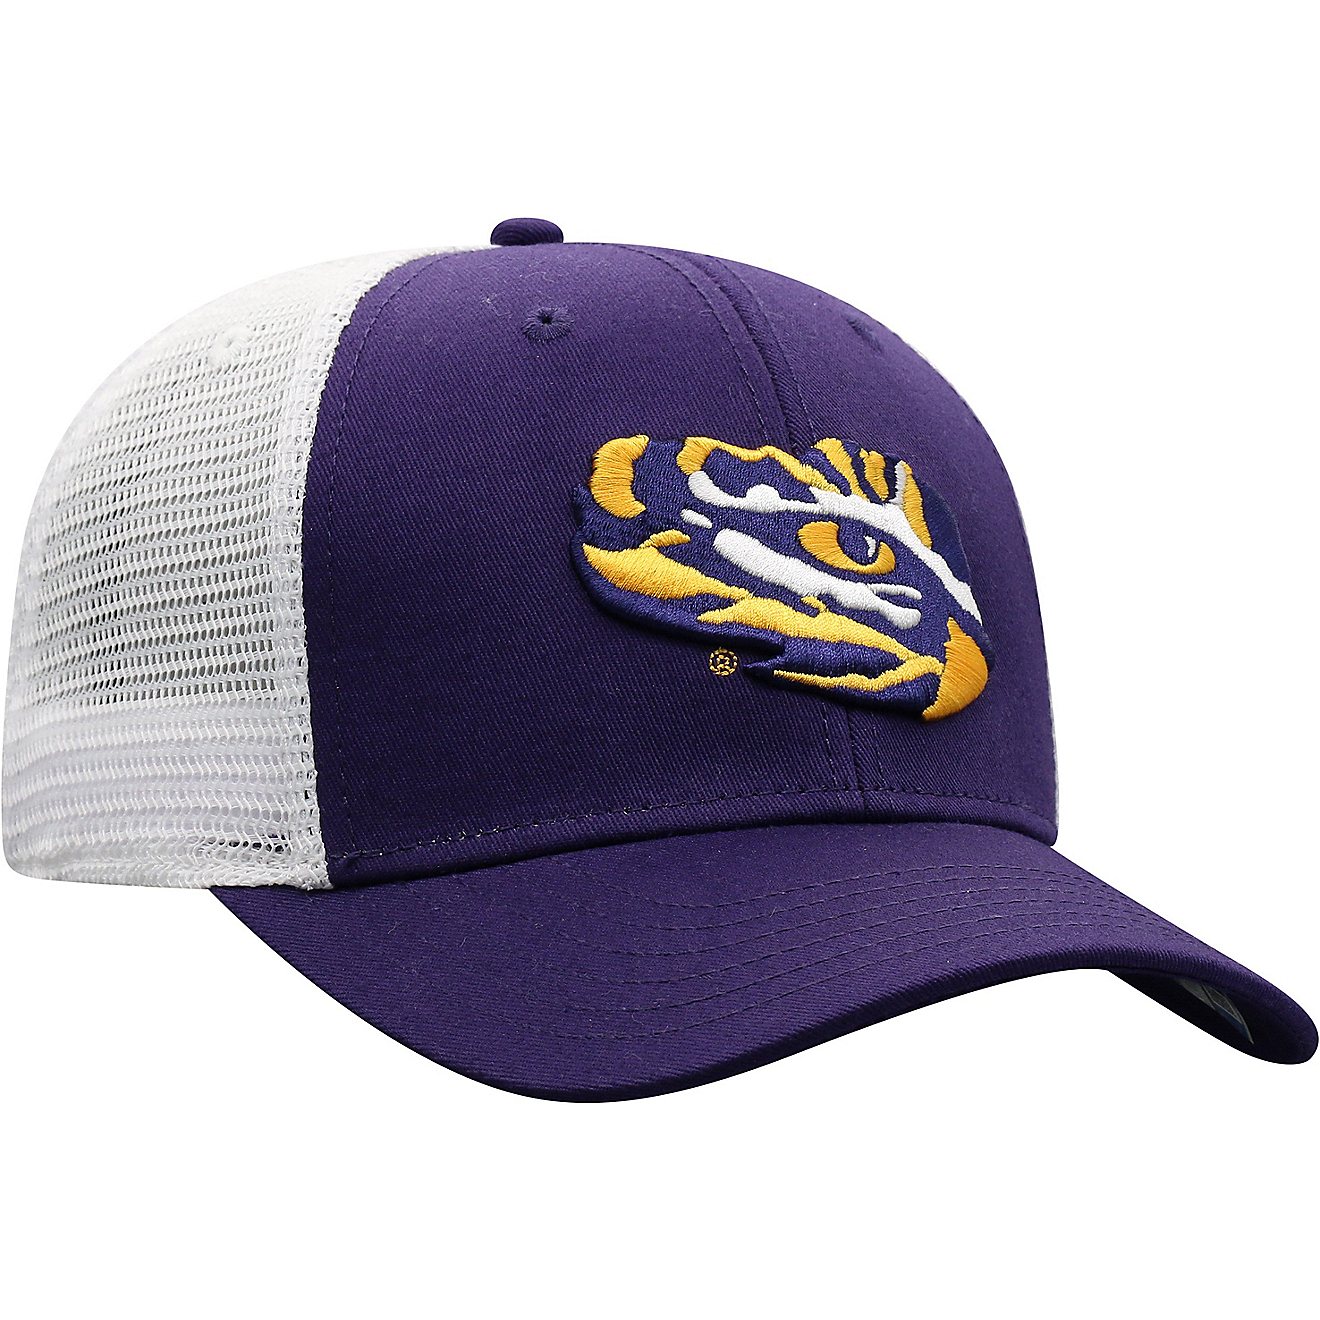 Top of the World Men's Louisiana State University BB Adjustable 2-Tone Cap                                                       - view number 3